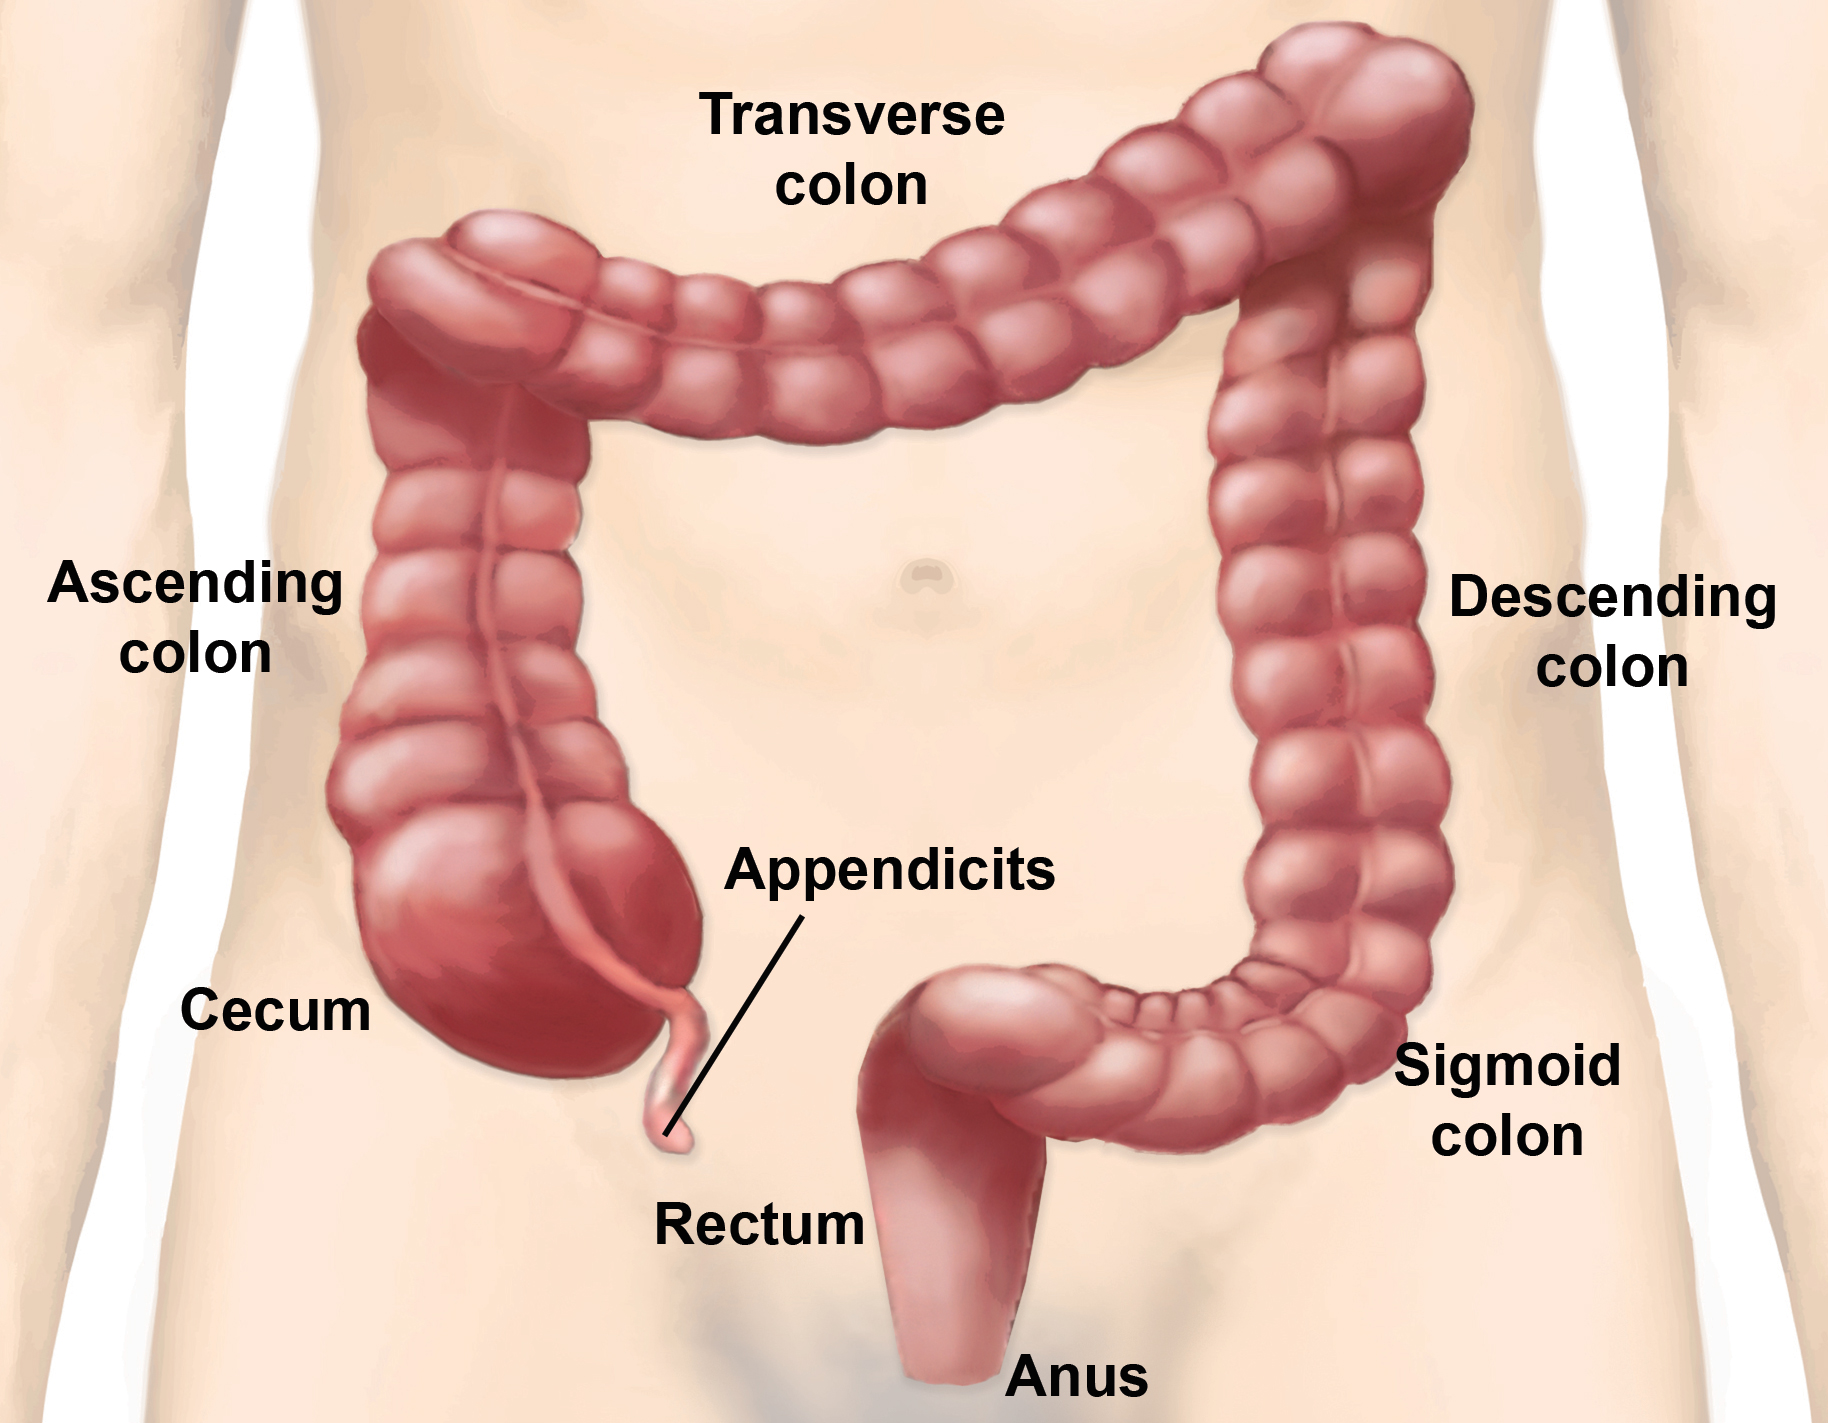 large-intestine-parts-and-functions-new-health-guide